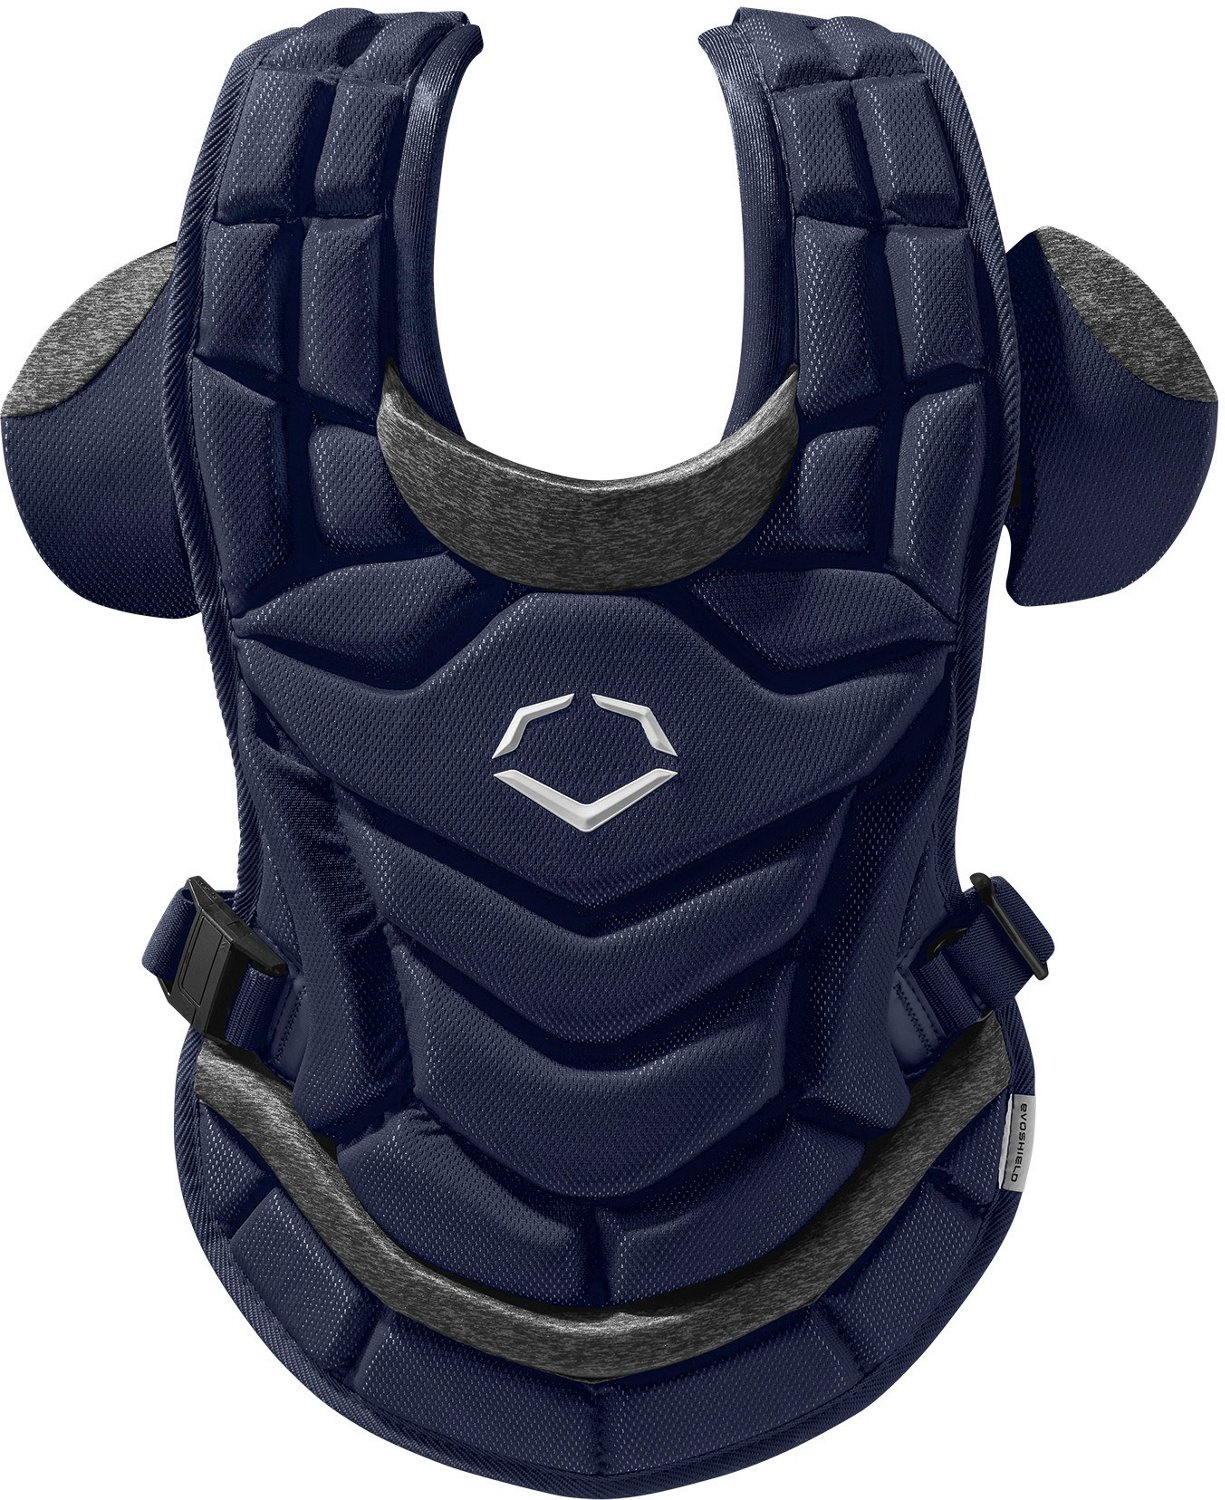 CHEST GUARD PROTECTIVE FILM